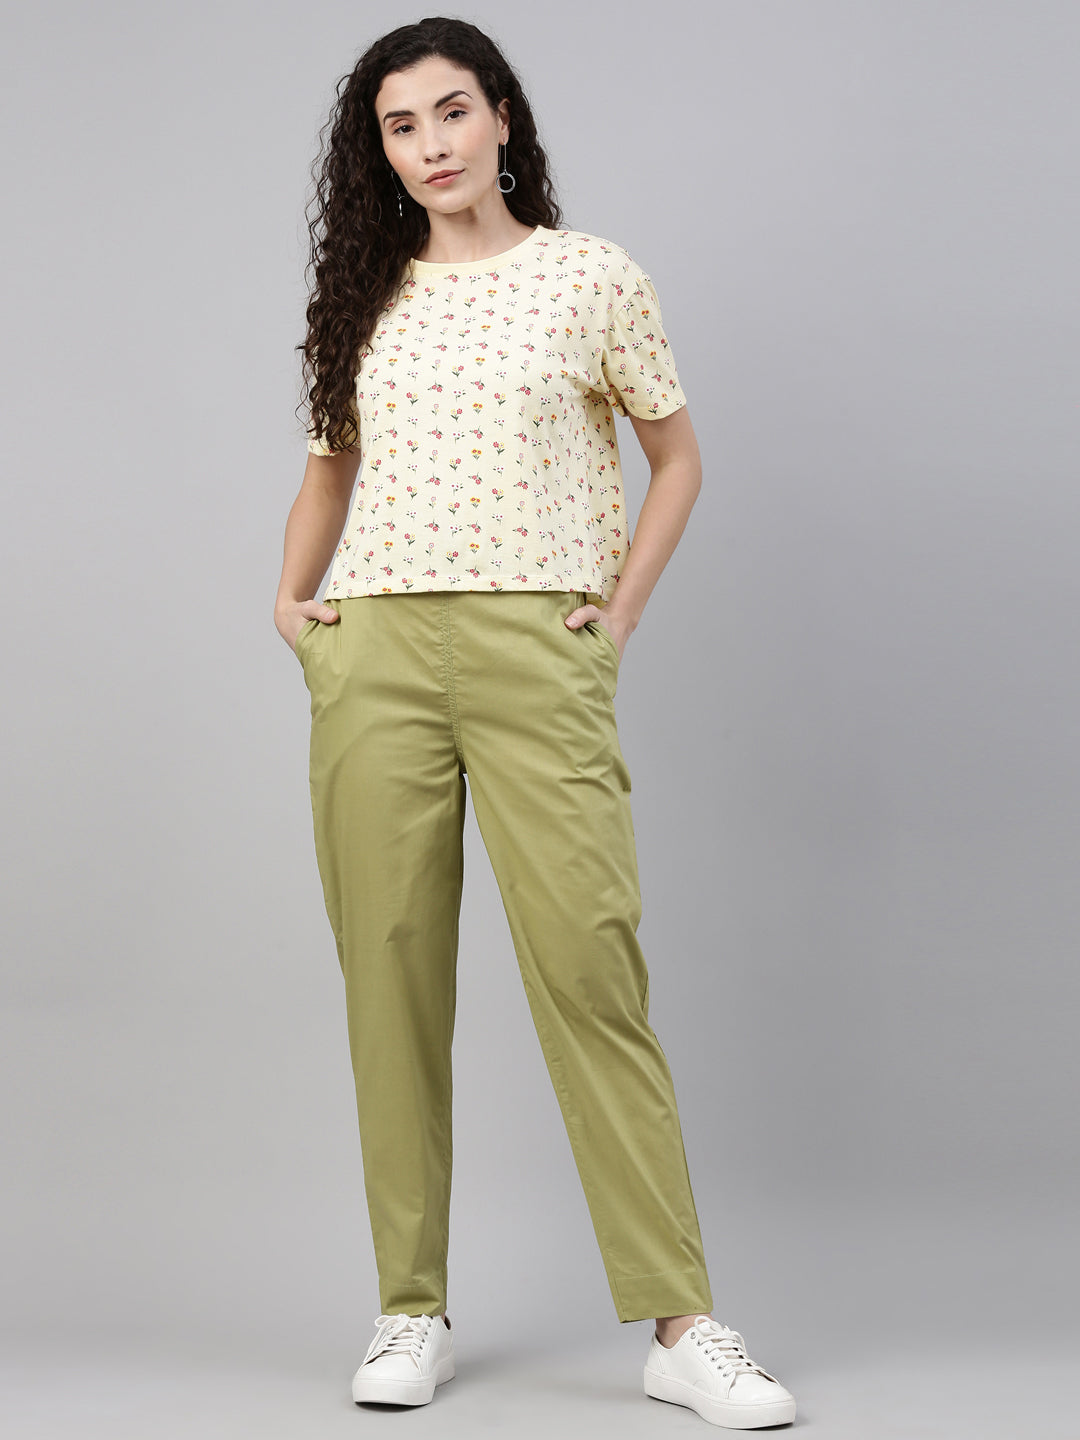 Buy Sajke Women's Cotton Pant Flex Non Stretchable Slim Fit Straight Casual  Trouser Pant for Women (S, Green) at Amazon.in